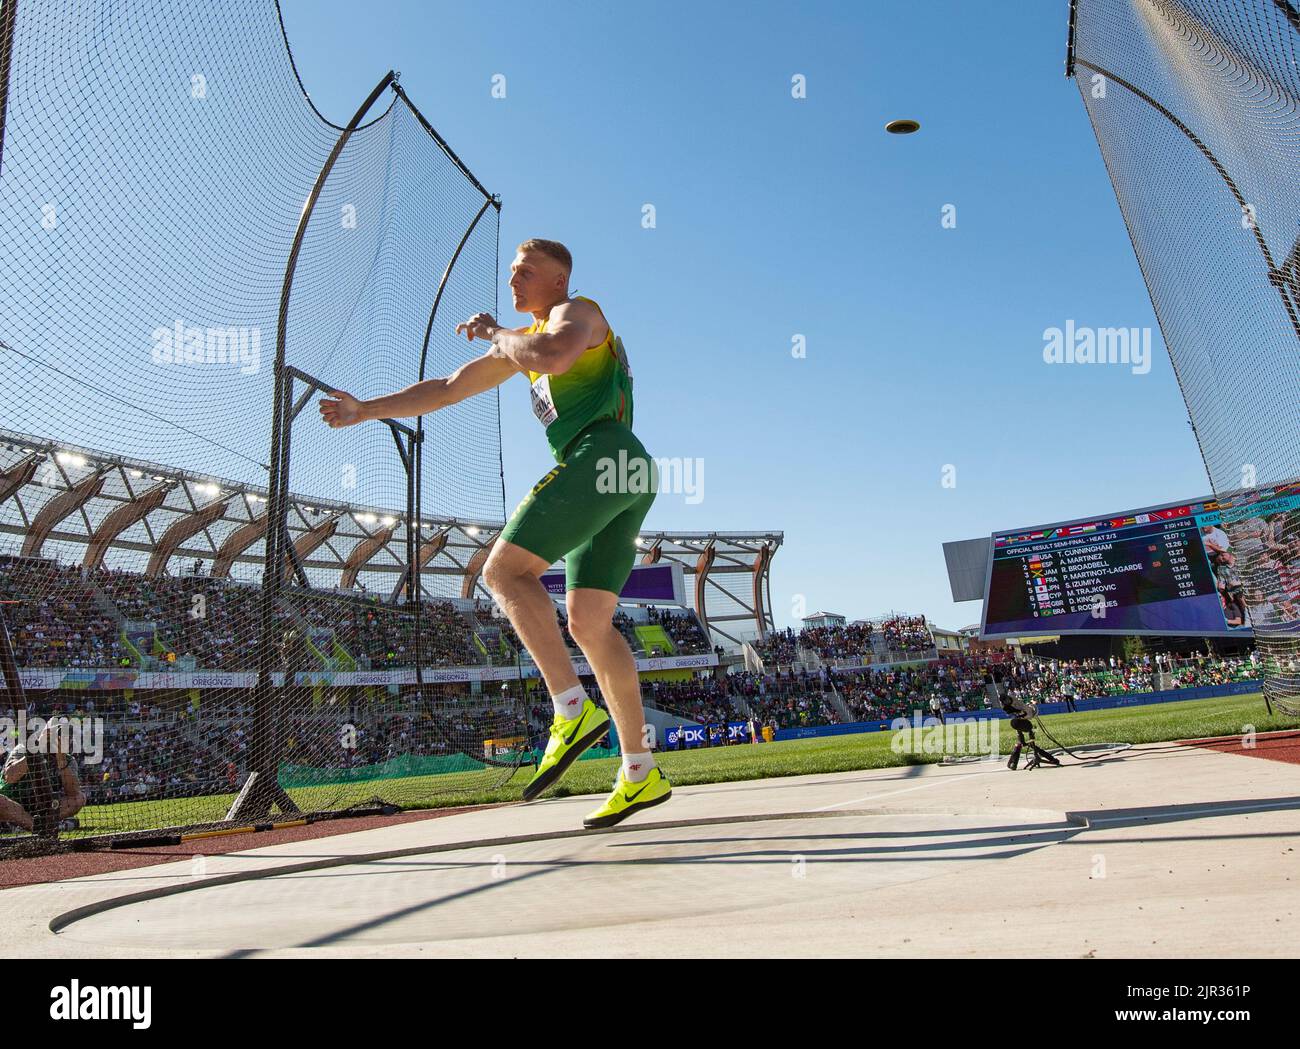 Mykolas Alekna of Lithuania competing in the men’s discus heats at Hayward Field Stadium, World Athletics Championships Oregon 2022 0n the 17th July 2 Stock Photo